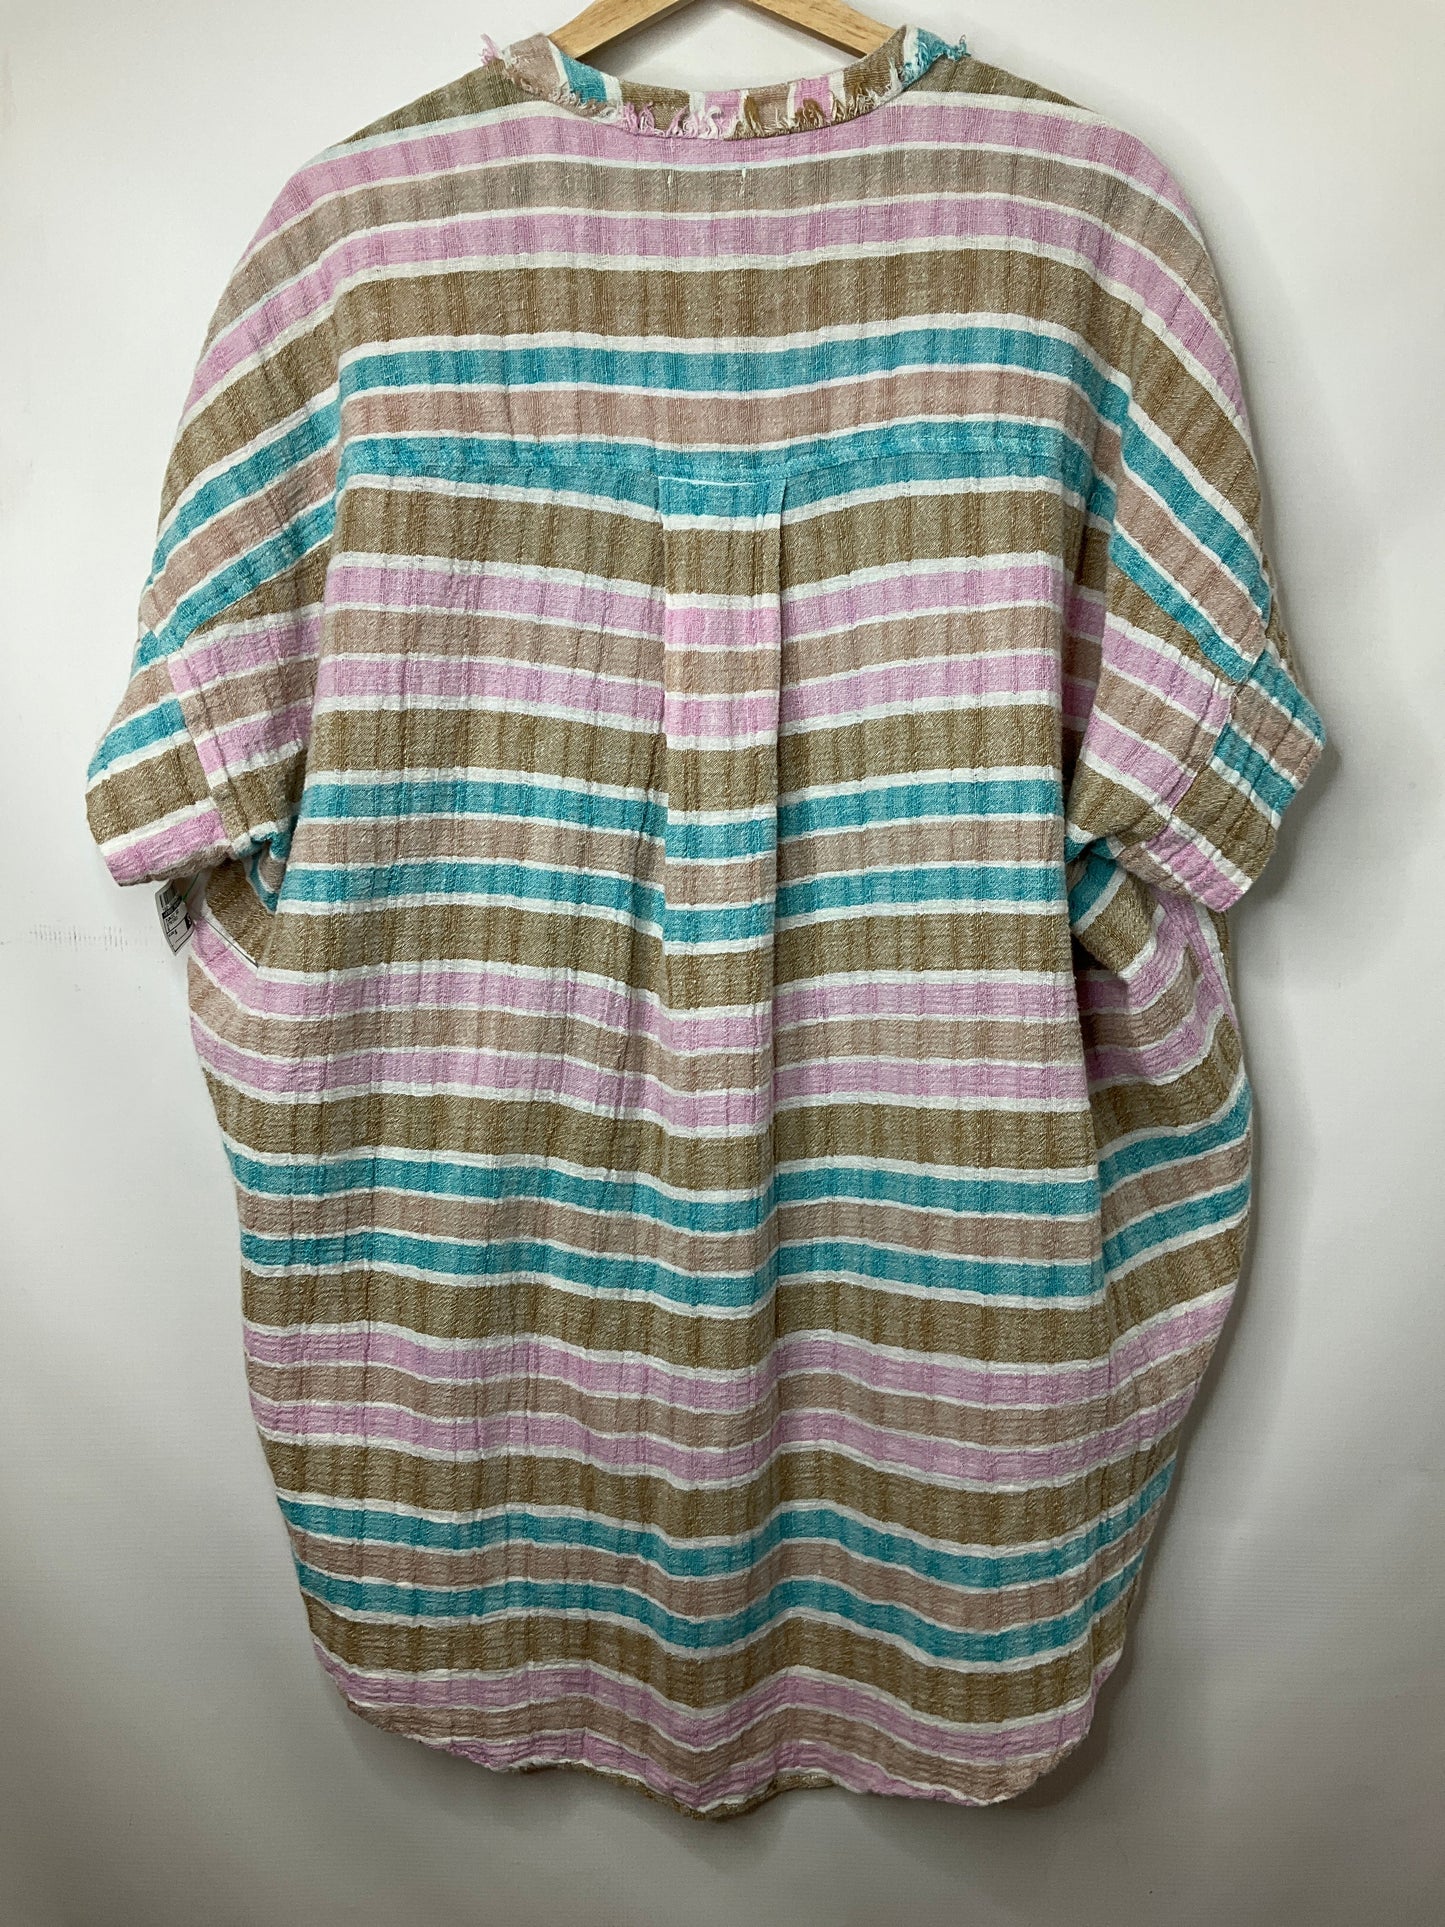 Striped Tunic Short Sleeve Free People, Size S